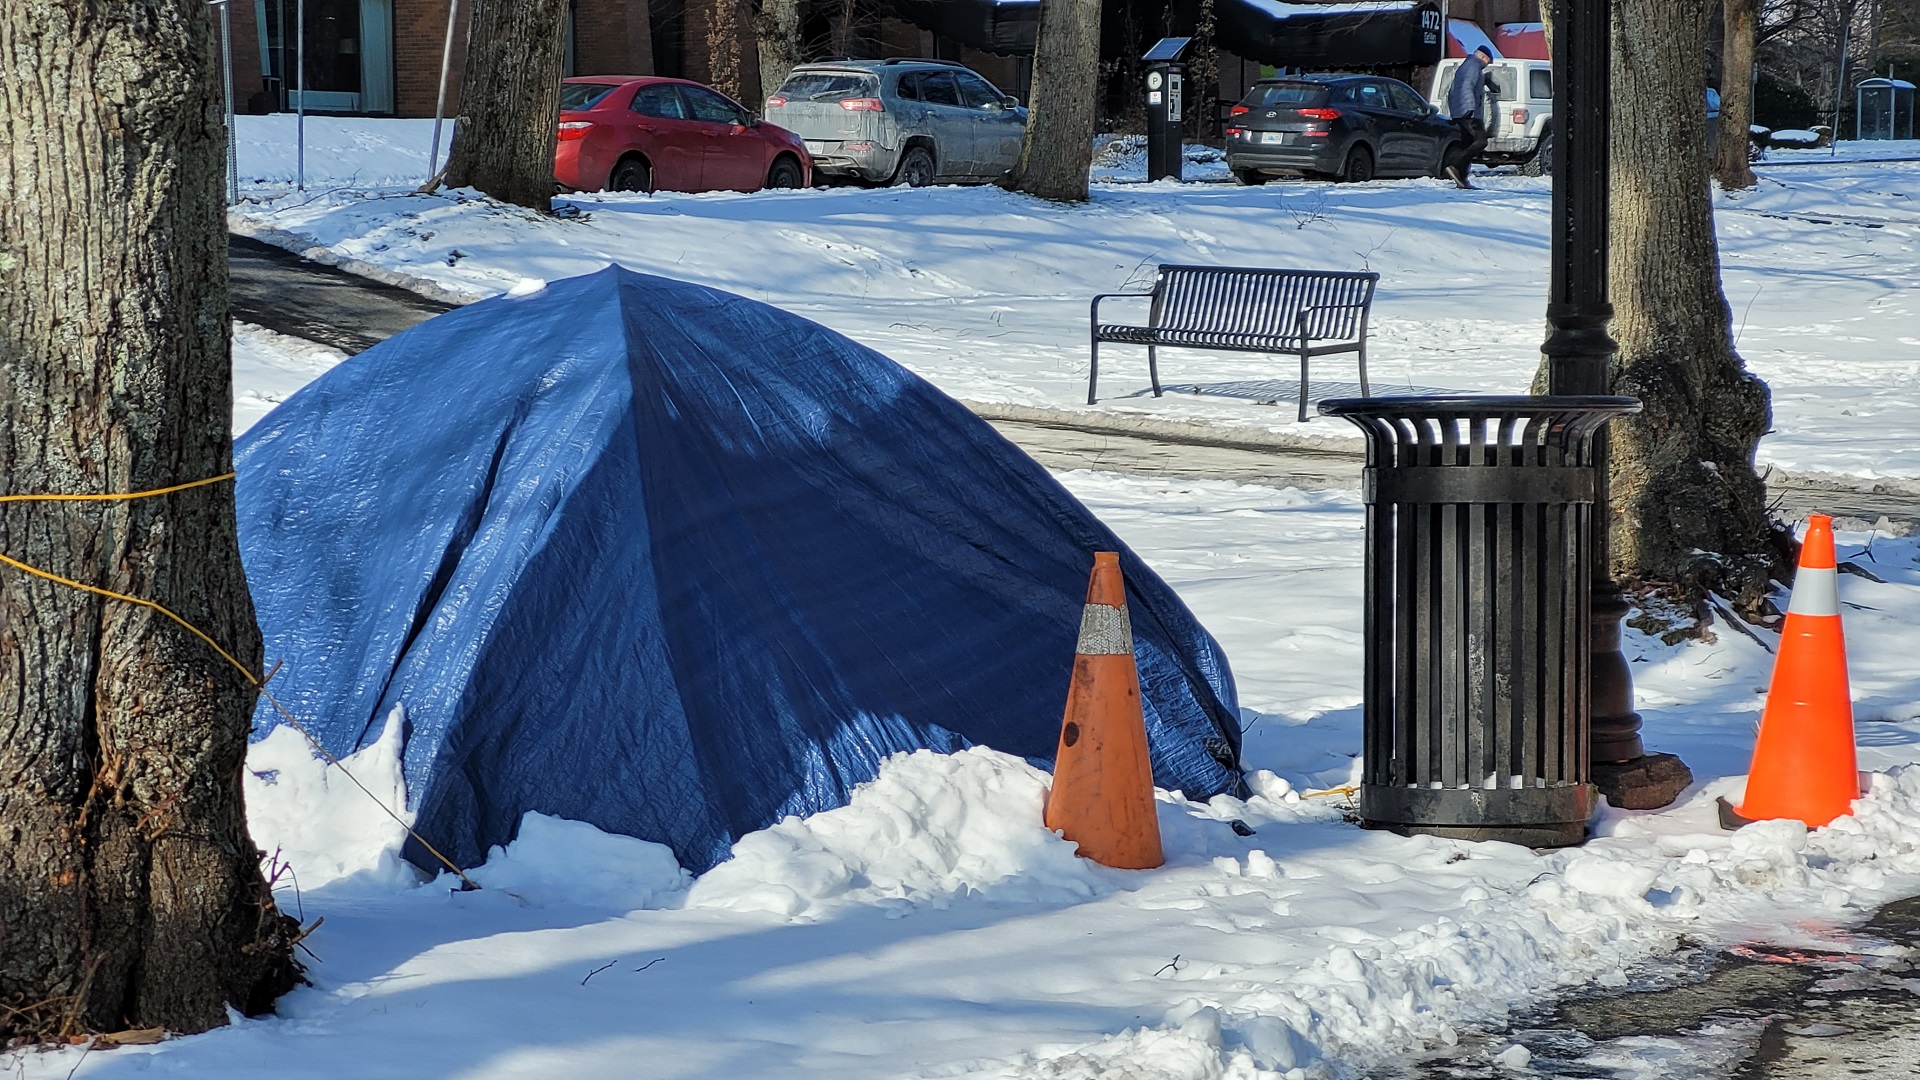 Tents are set up outside in a snowy city.